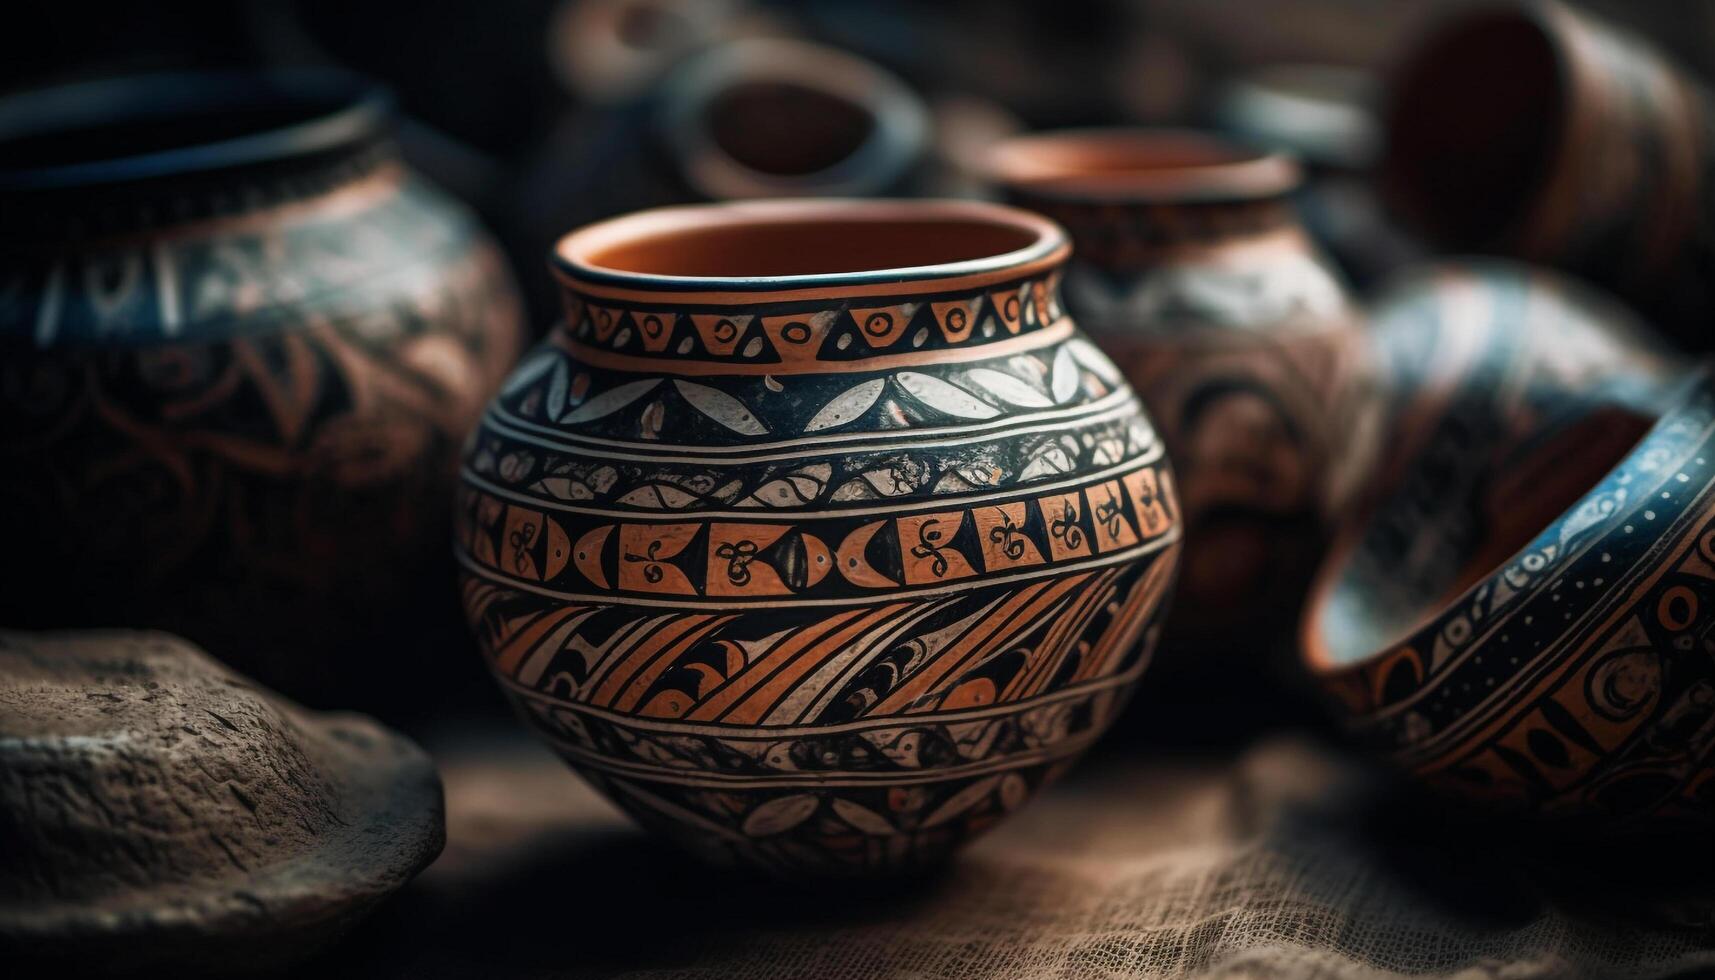 Antique earthenware jug, a souvenir of indigenous cultures' pottery craft generated by AI photo